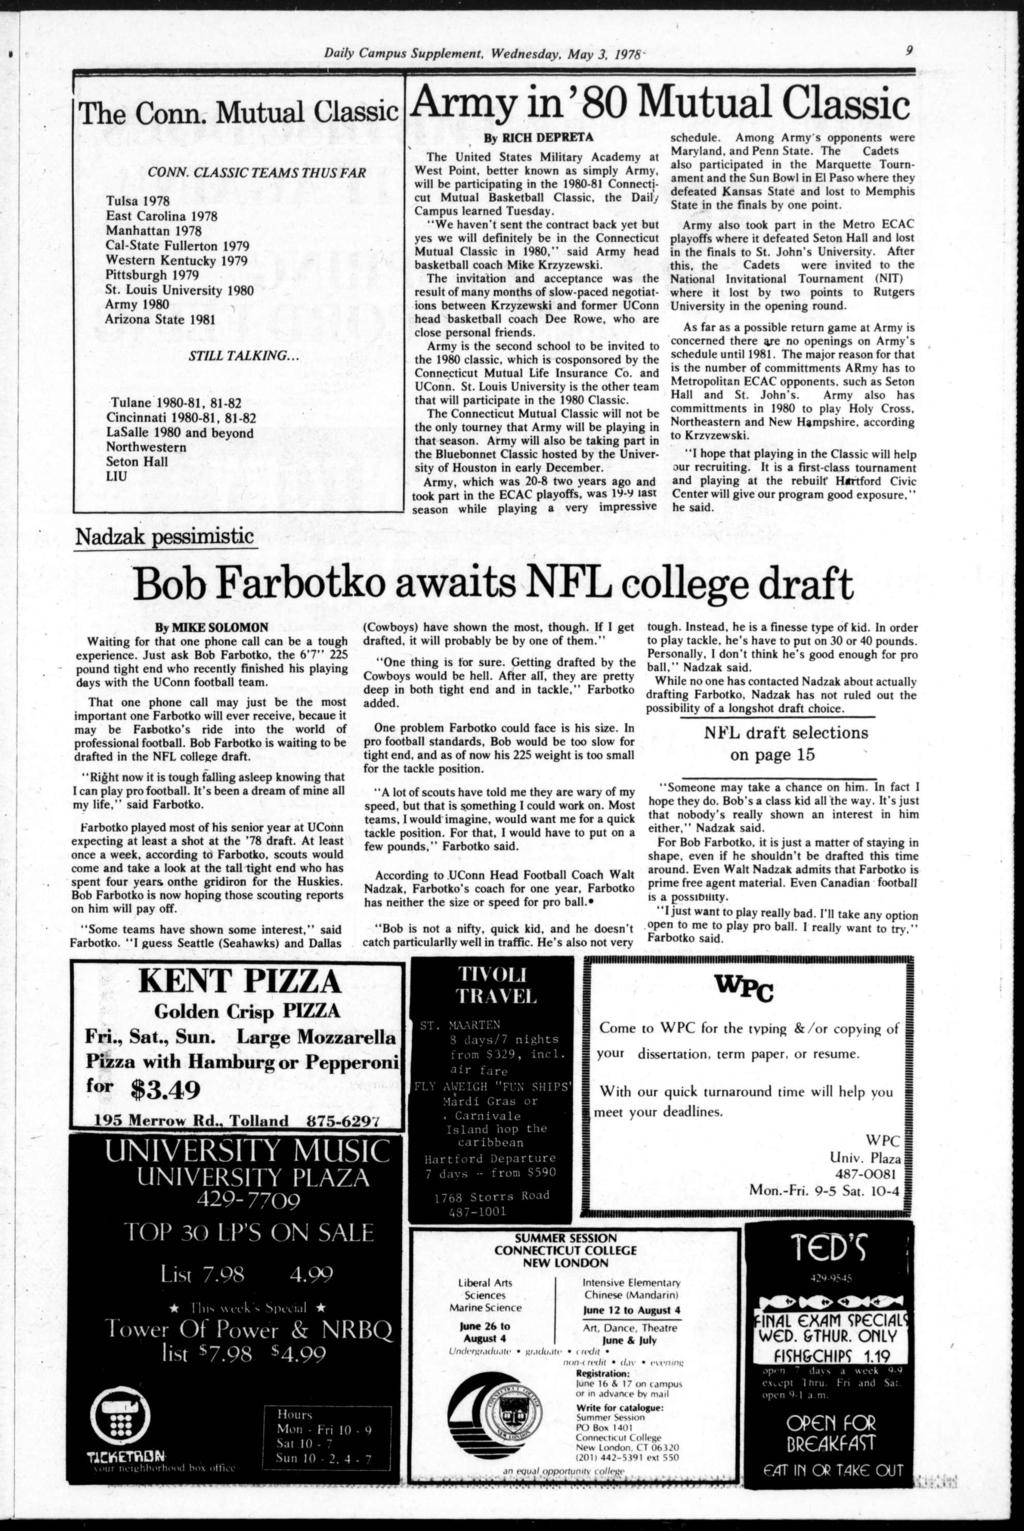 Daly Campus Supplement, Wednesday, May 3, 1978 The Conn. Mutual Classc CONN.